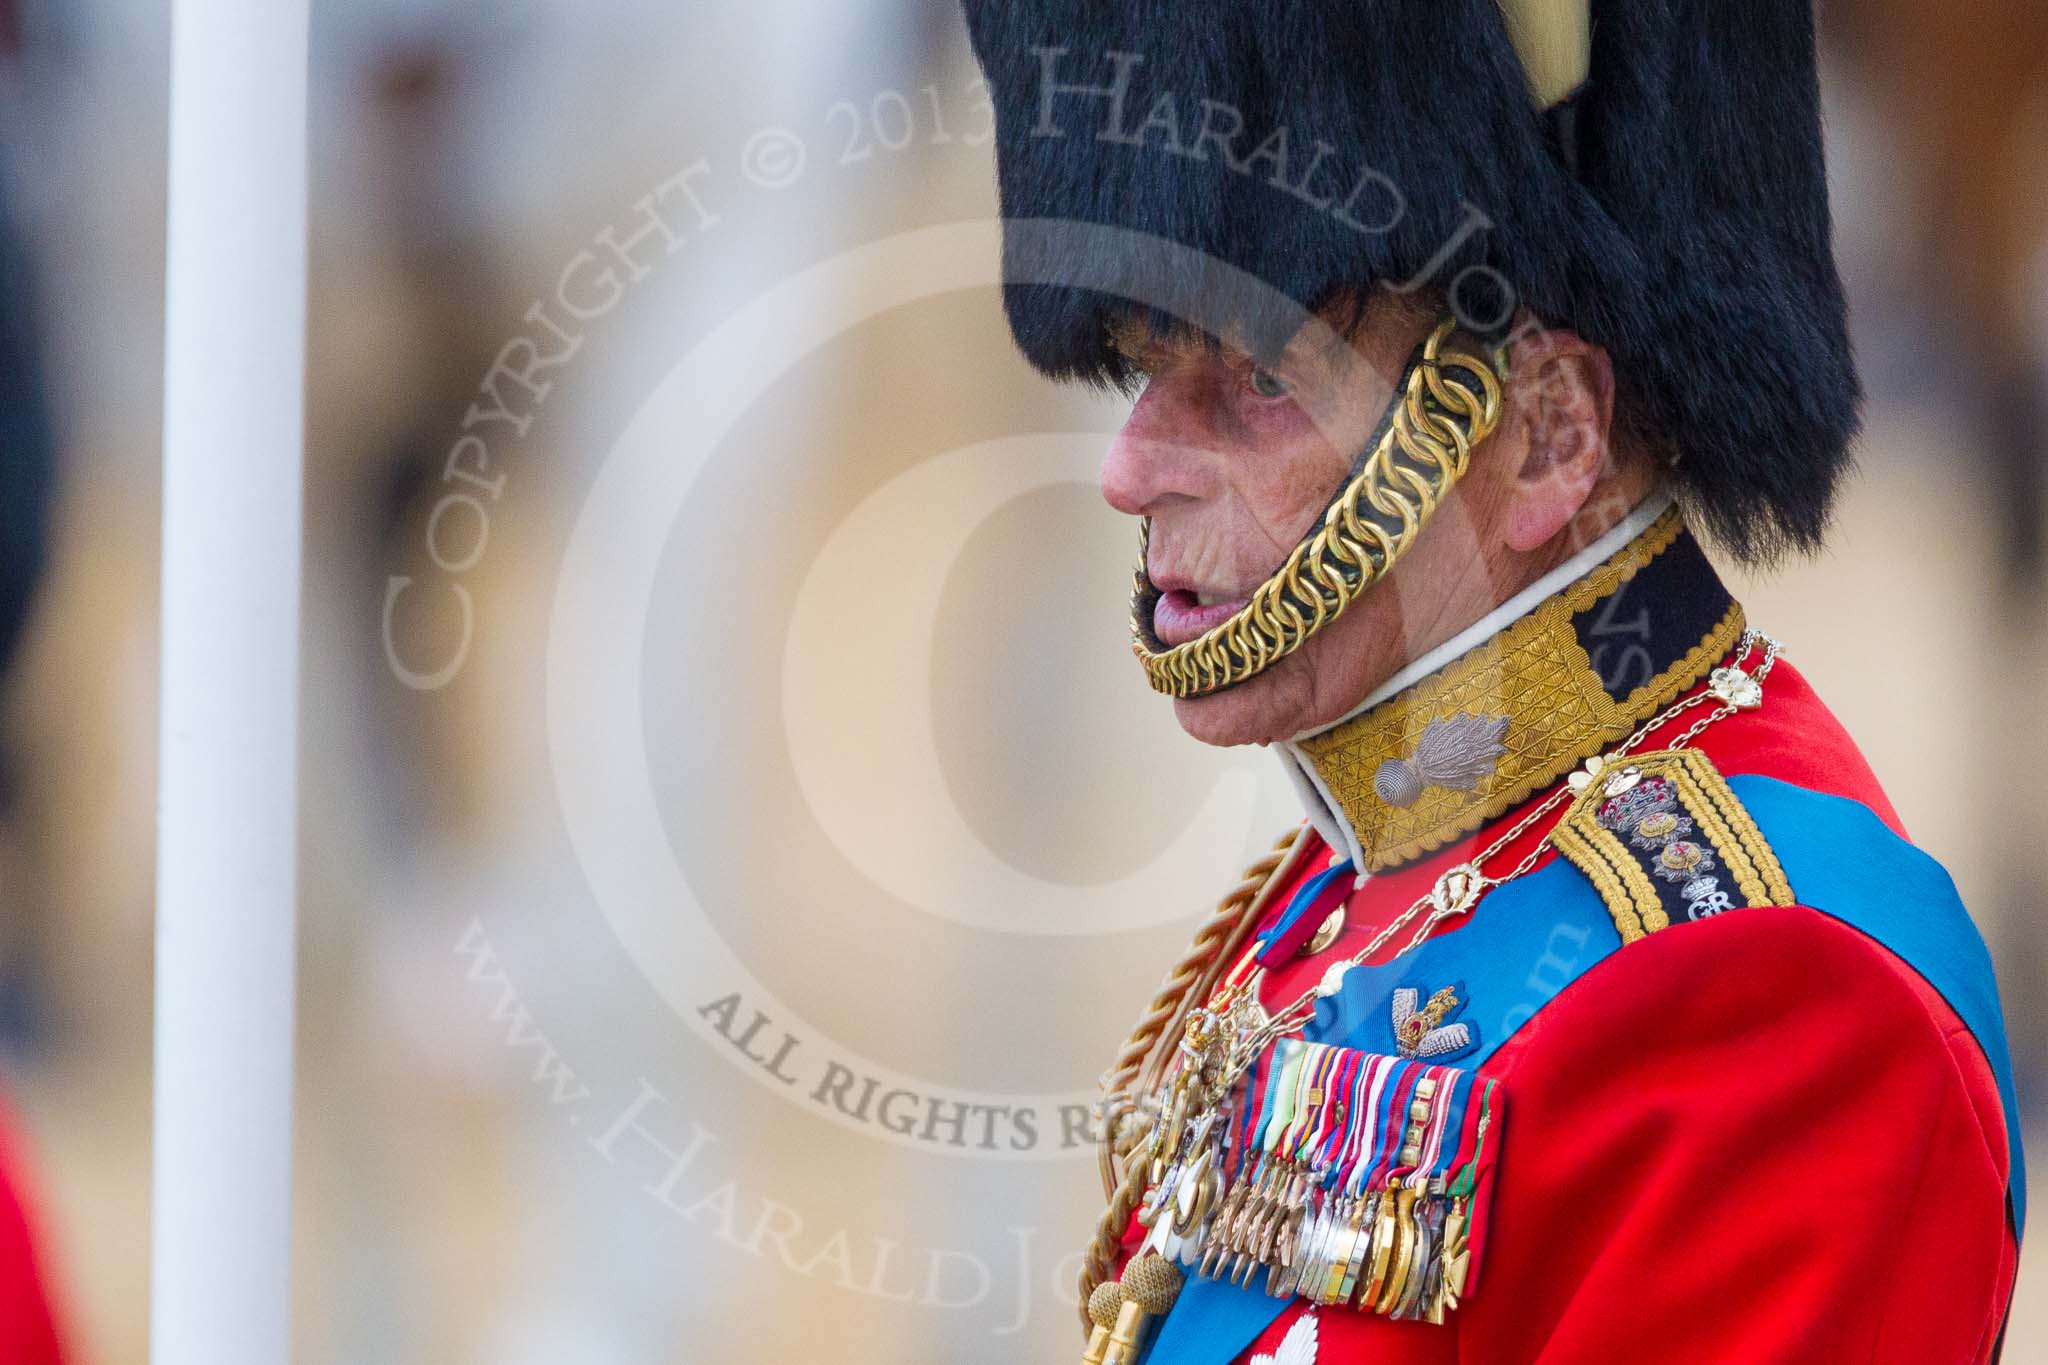 Trooping the Colour 2015. Image #256, 13 June 2015 11:00 Horse Guards Parade, London, UK